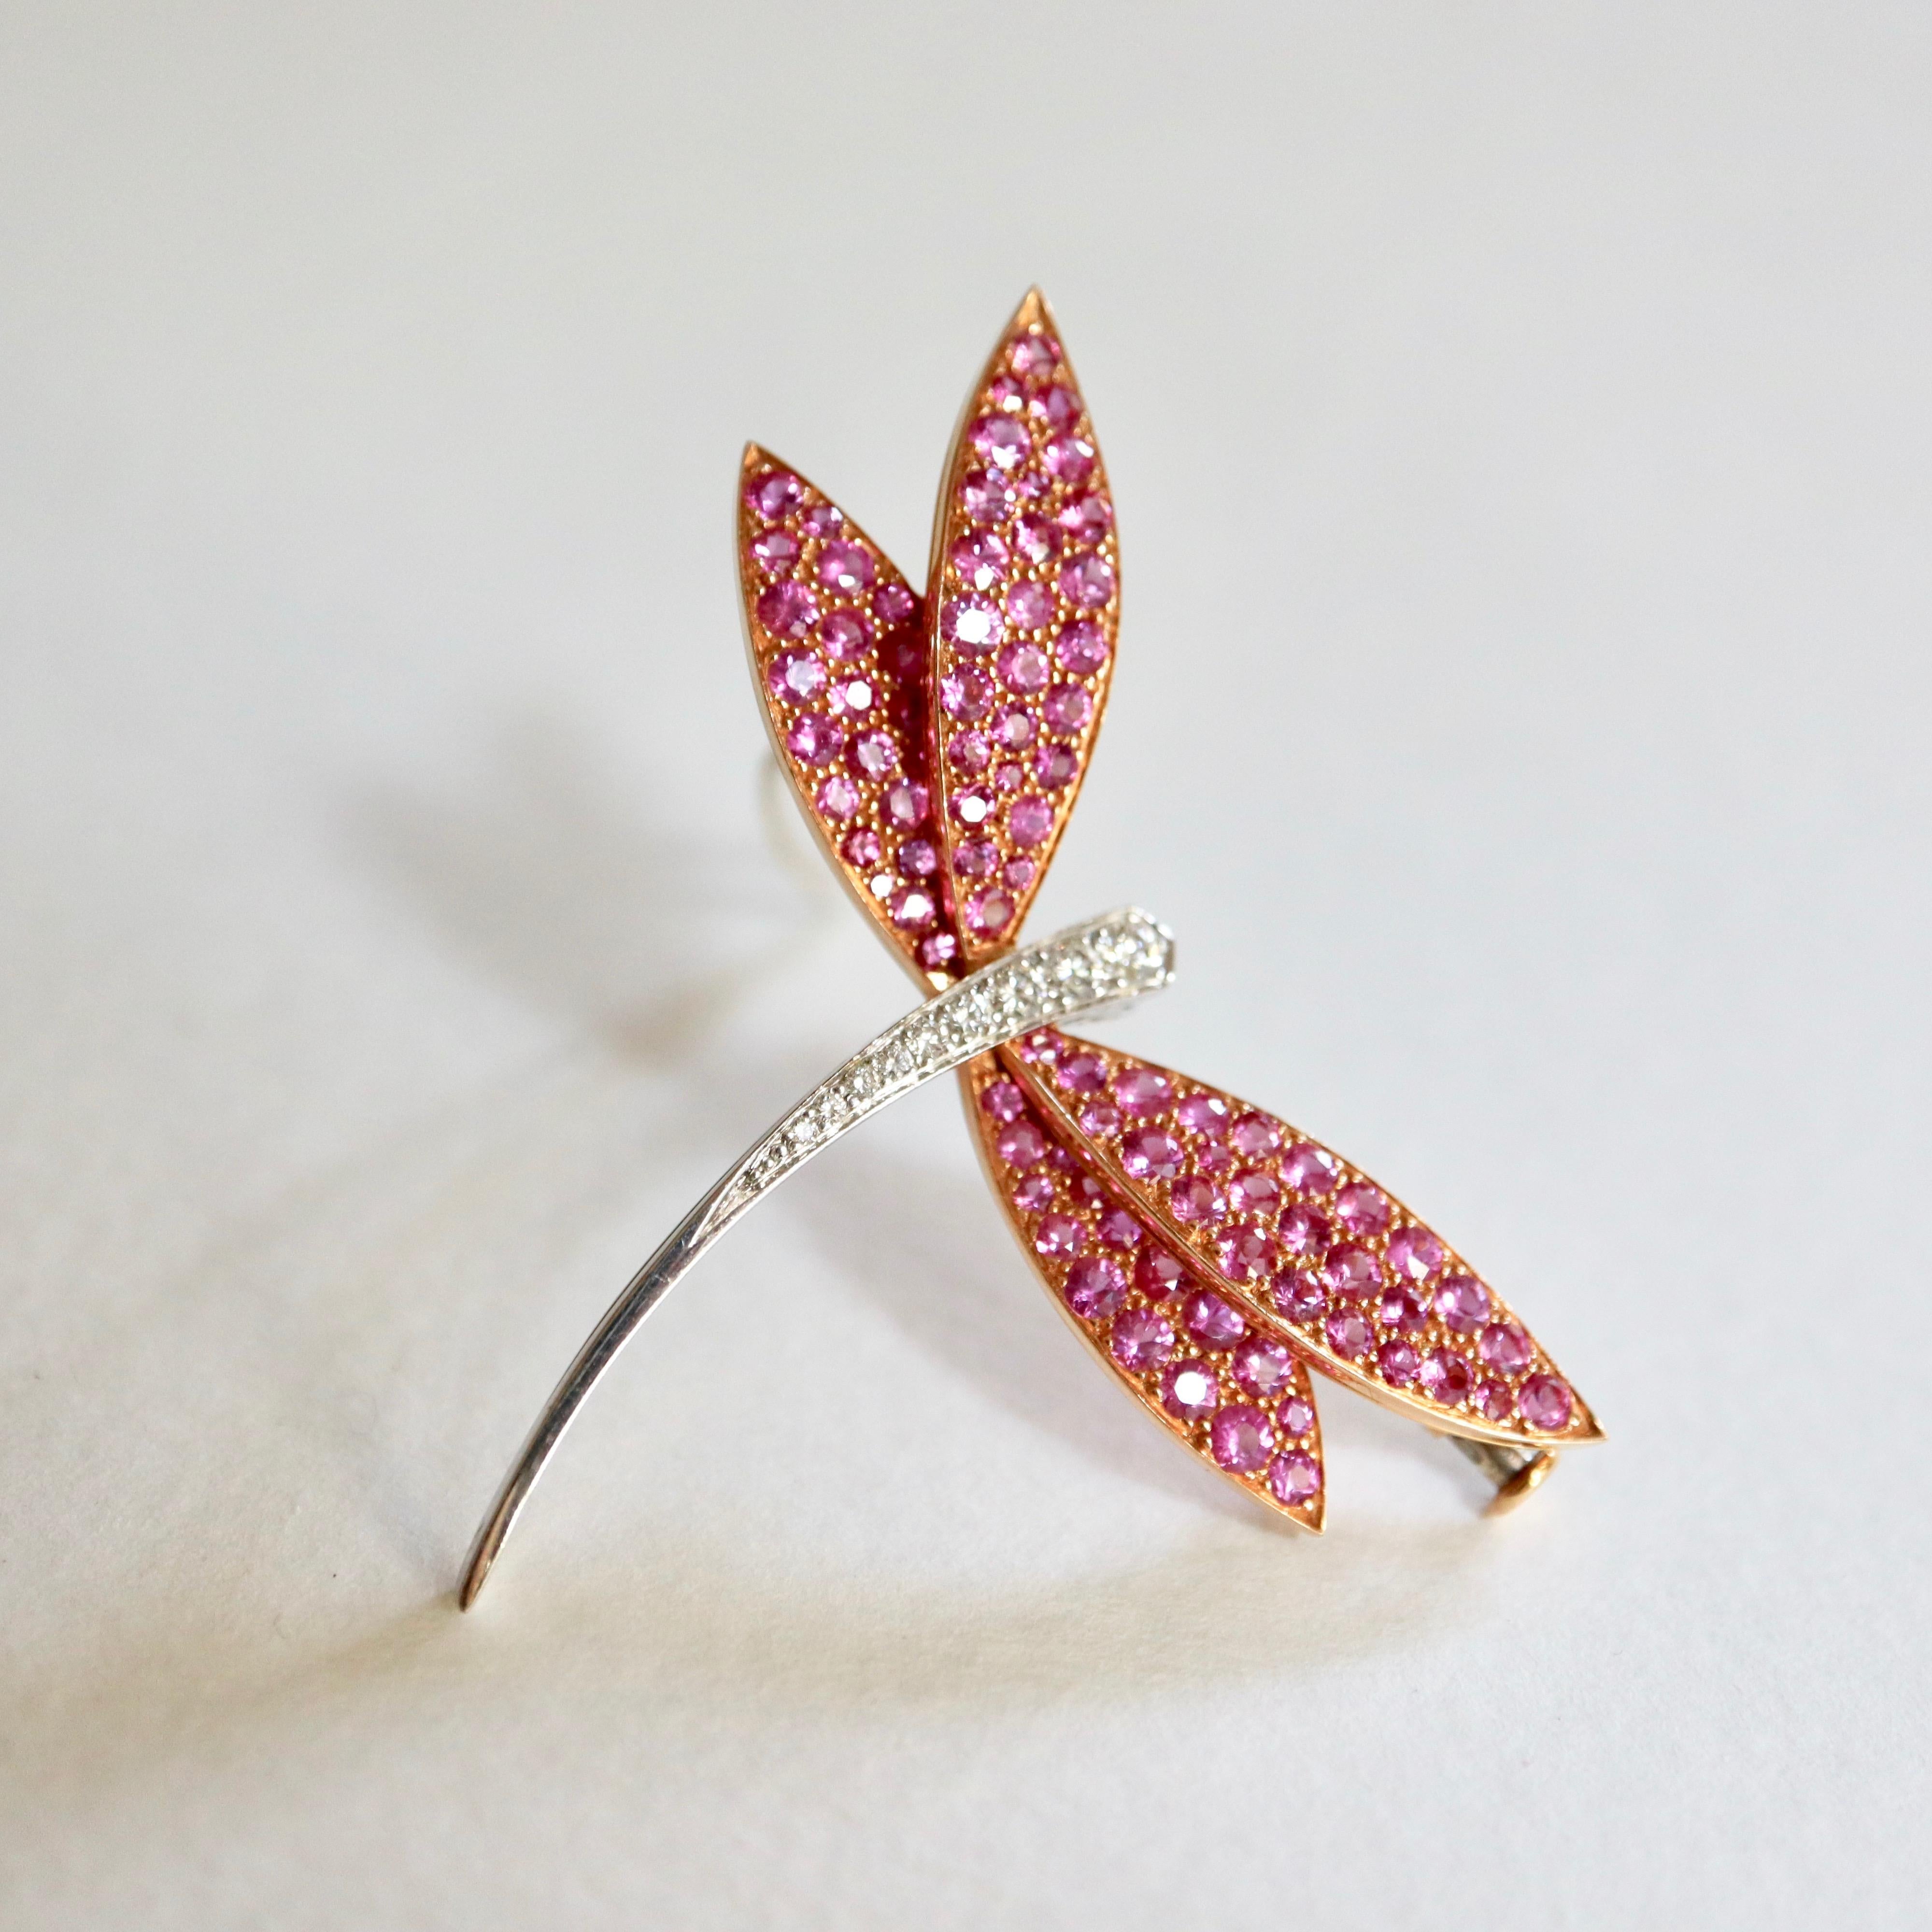 VAN CLEEF & ARPELS 18 carat White Gold and 18 carat Yellow Gold Dragonfly Brooch, Pink Sapphires and Diamonds.
Brooch VAN CLEEF & ARPELS Dragonfly, the Body in 18 carat white Gold is set with 9 diamonds and the 18 carat yellow Gold Wings are set